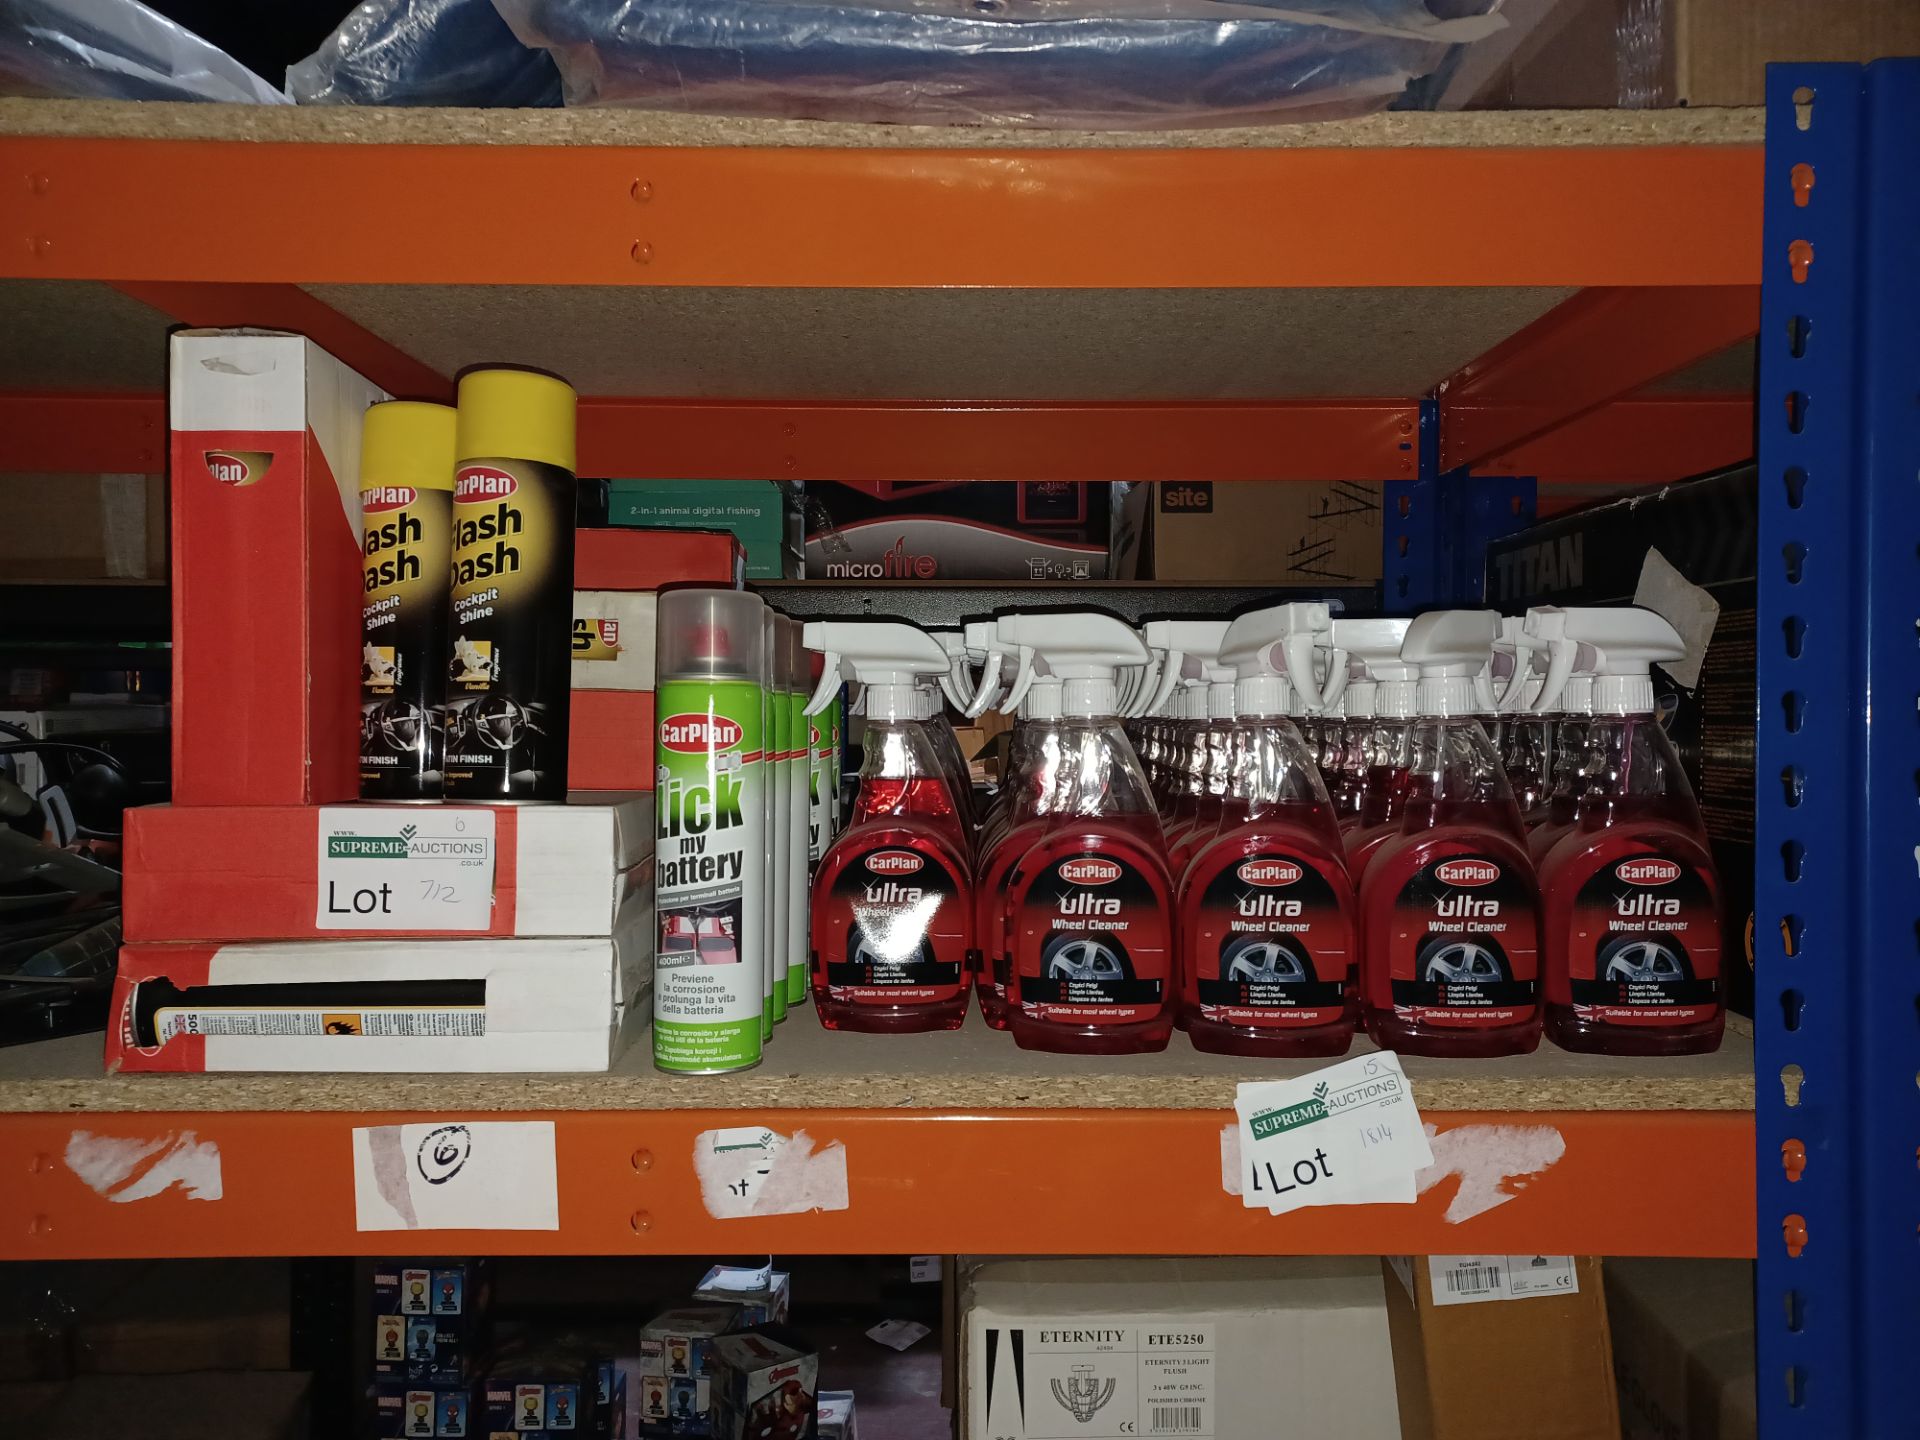 APPROX 80 X MIXED LOT OF CAR CLEANERS, INCLUIDNG DASH SHINE, ULTRA WHEEL CLEANER ETC - PCK